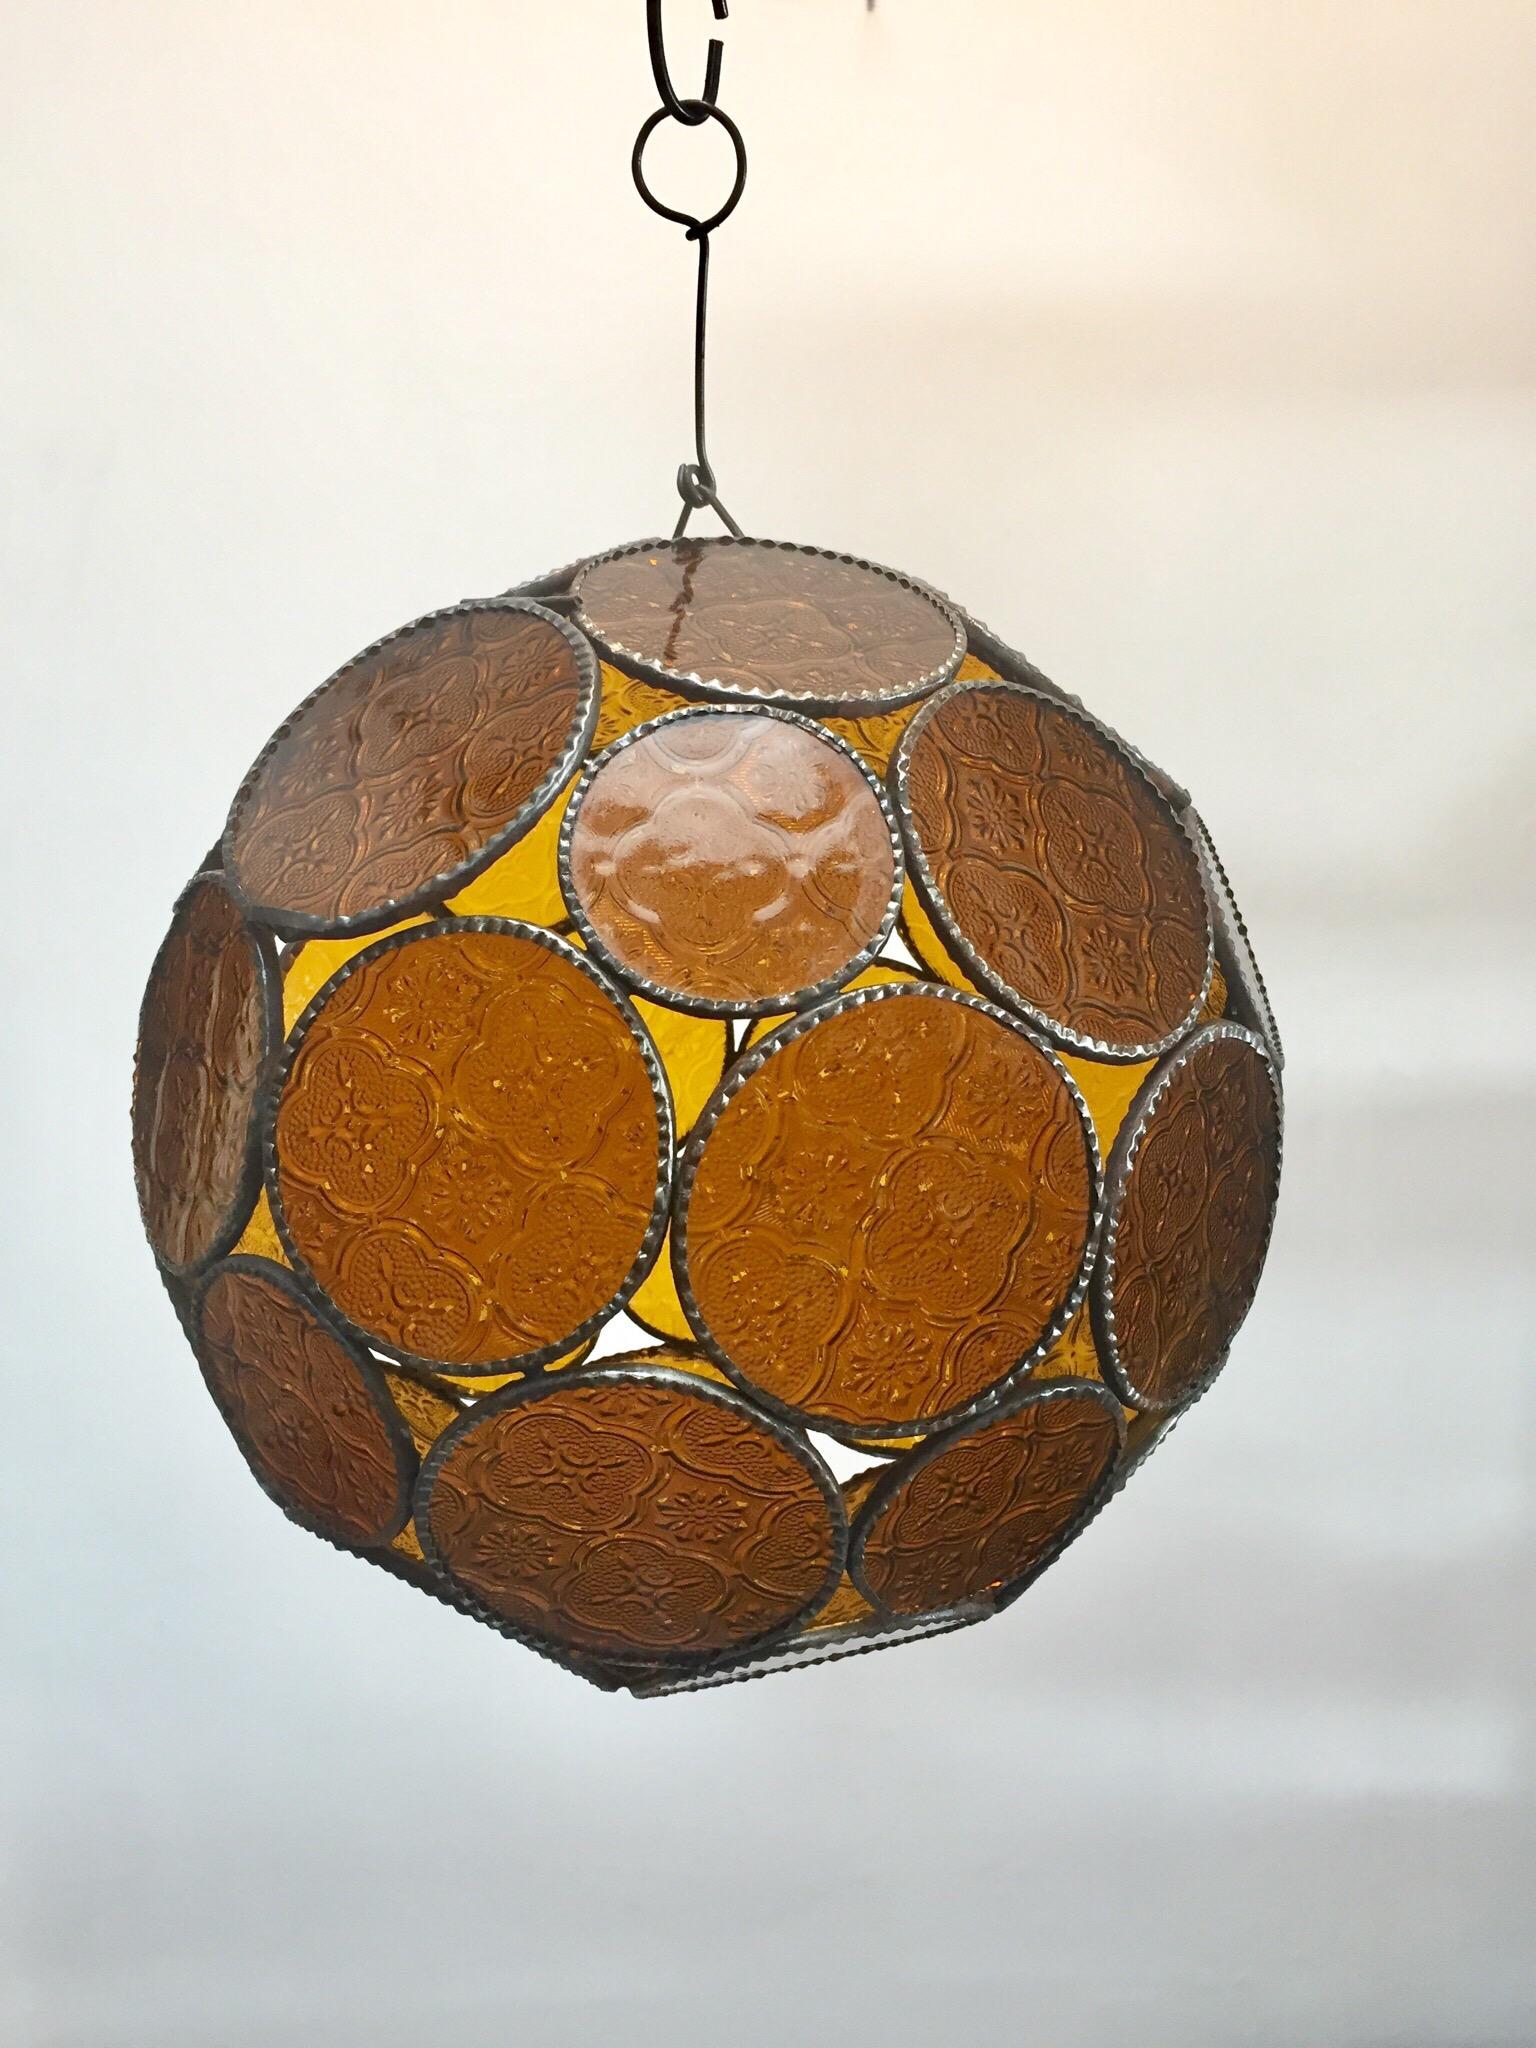 Handcrafted Moroccan amber glass lantern or Moorish pendant.
Amber molded glass with Moorish design circles put together in an orb style lamp.
Handmade in Marrakech, metal rust color finish, colorful multifaceted orb glass pendant.
Could be